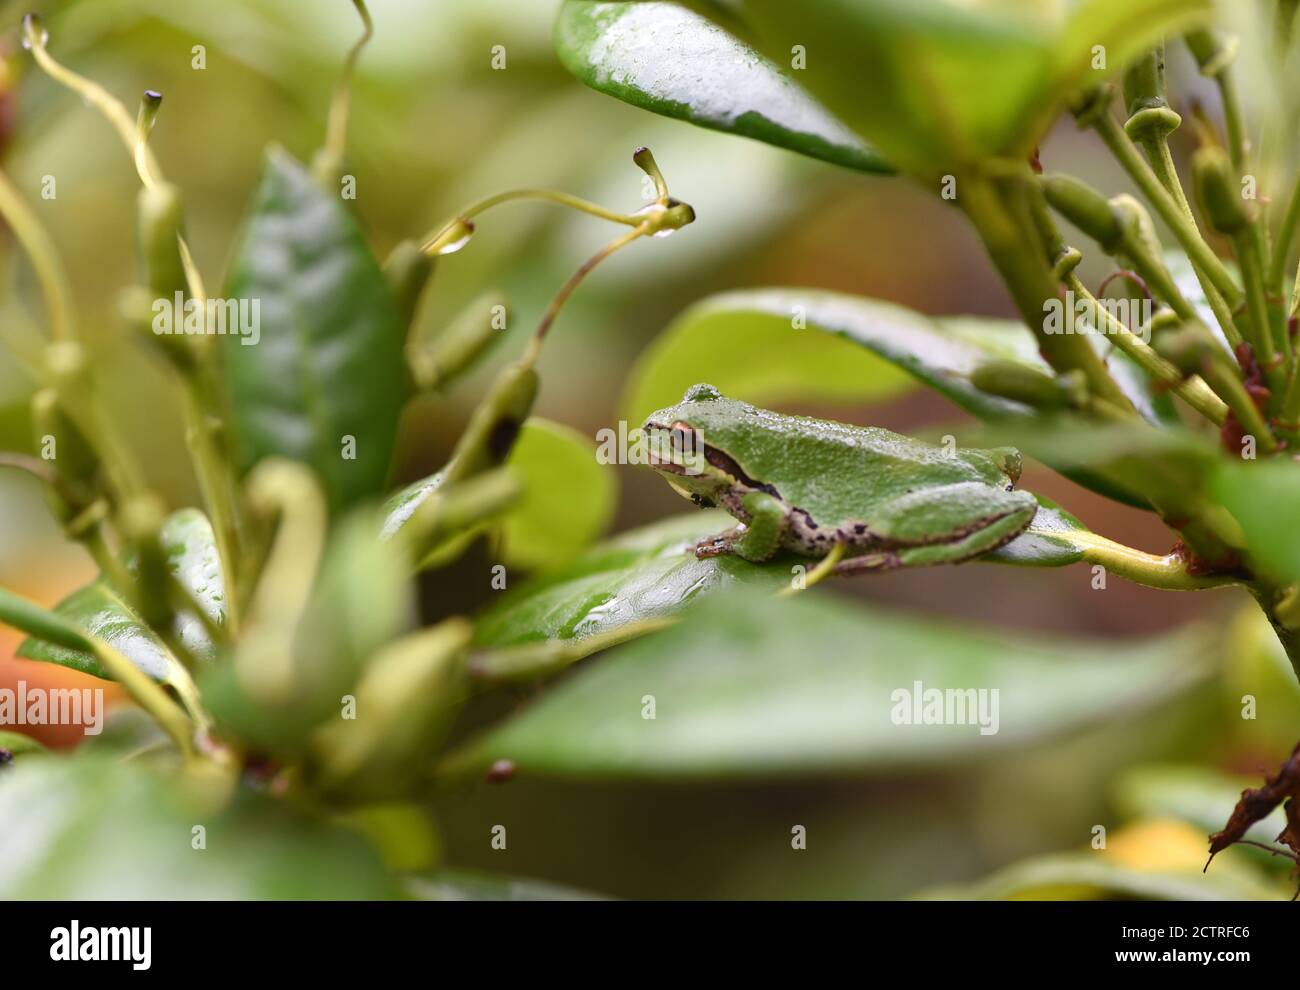 A wet Pacific Treefrog (Pseudacris regilla) sits on a Rhododendron leaf as it shelters from the rain in a garden in Victoria, British Columbia, Canada Stock Photo